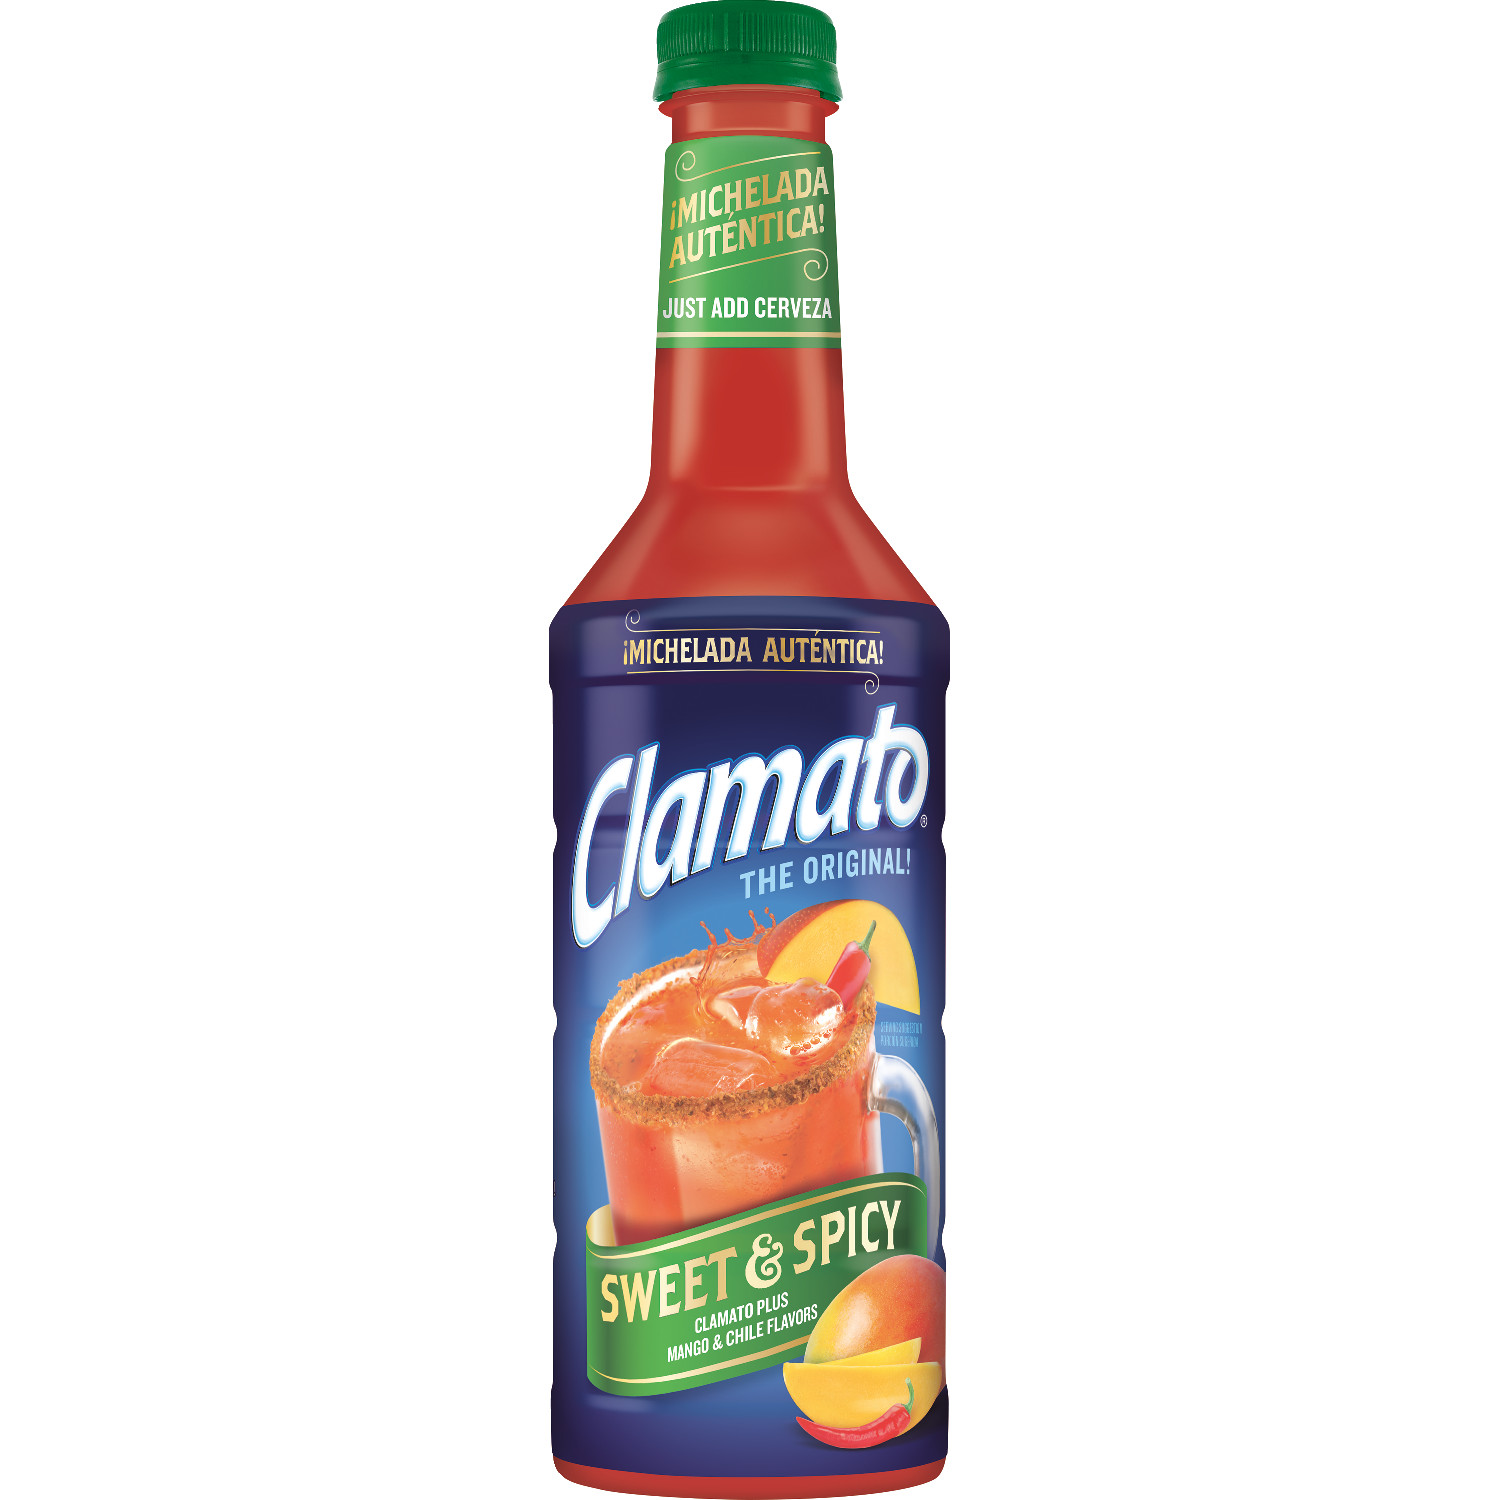 Clamato Sweet & Spicy Tomato Cocktail, 1 L Bottle, 6 Count - image 1 of 1